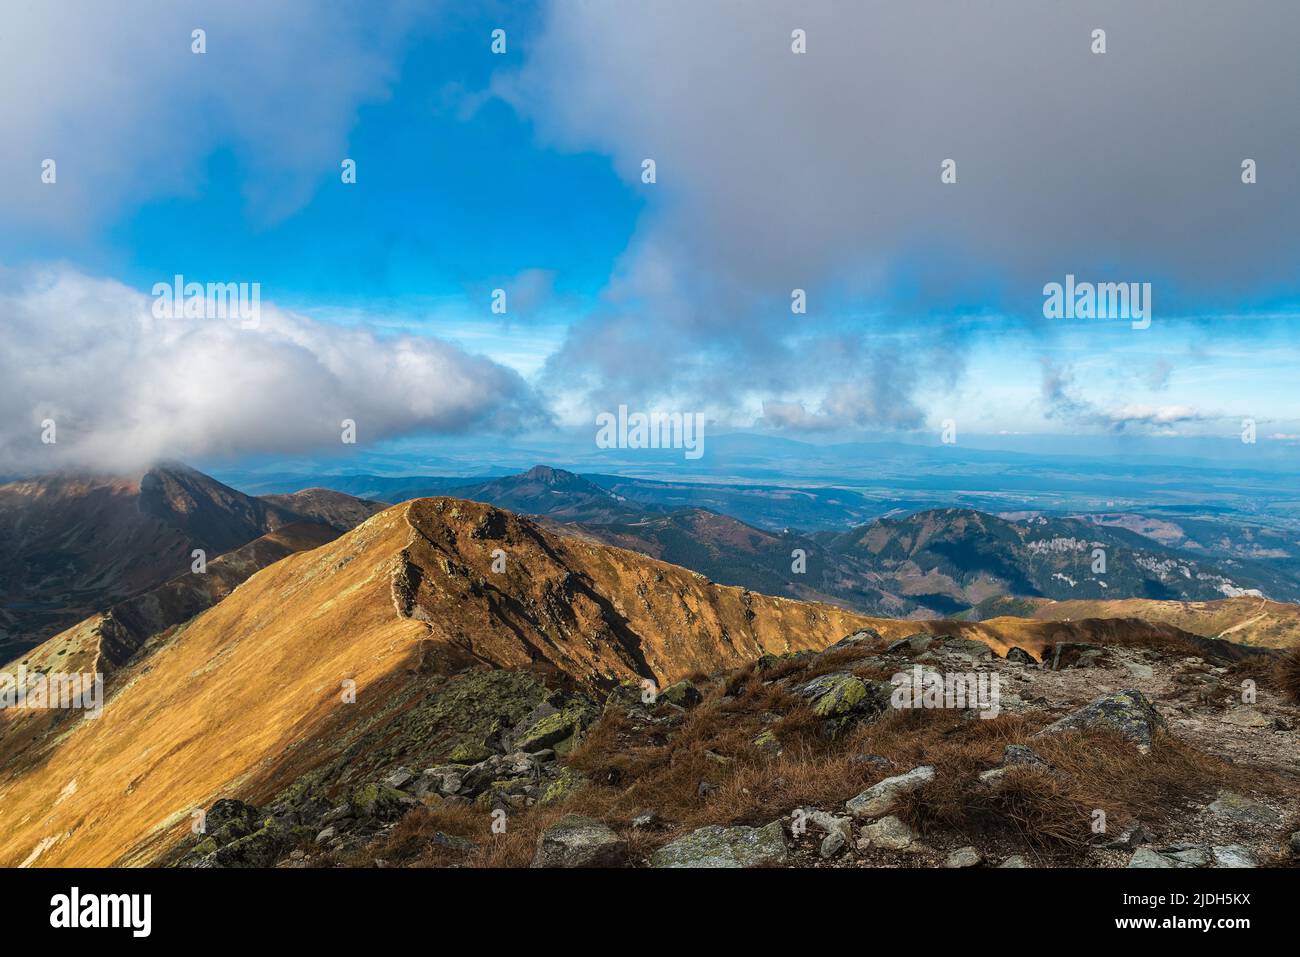 View from Jakubina hill summit in Western Tatras mountains in Slovakia during autumn day with blue sky and clouds Stock Photo